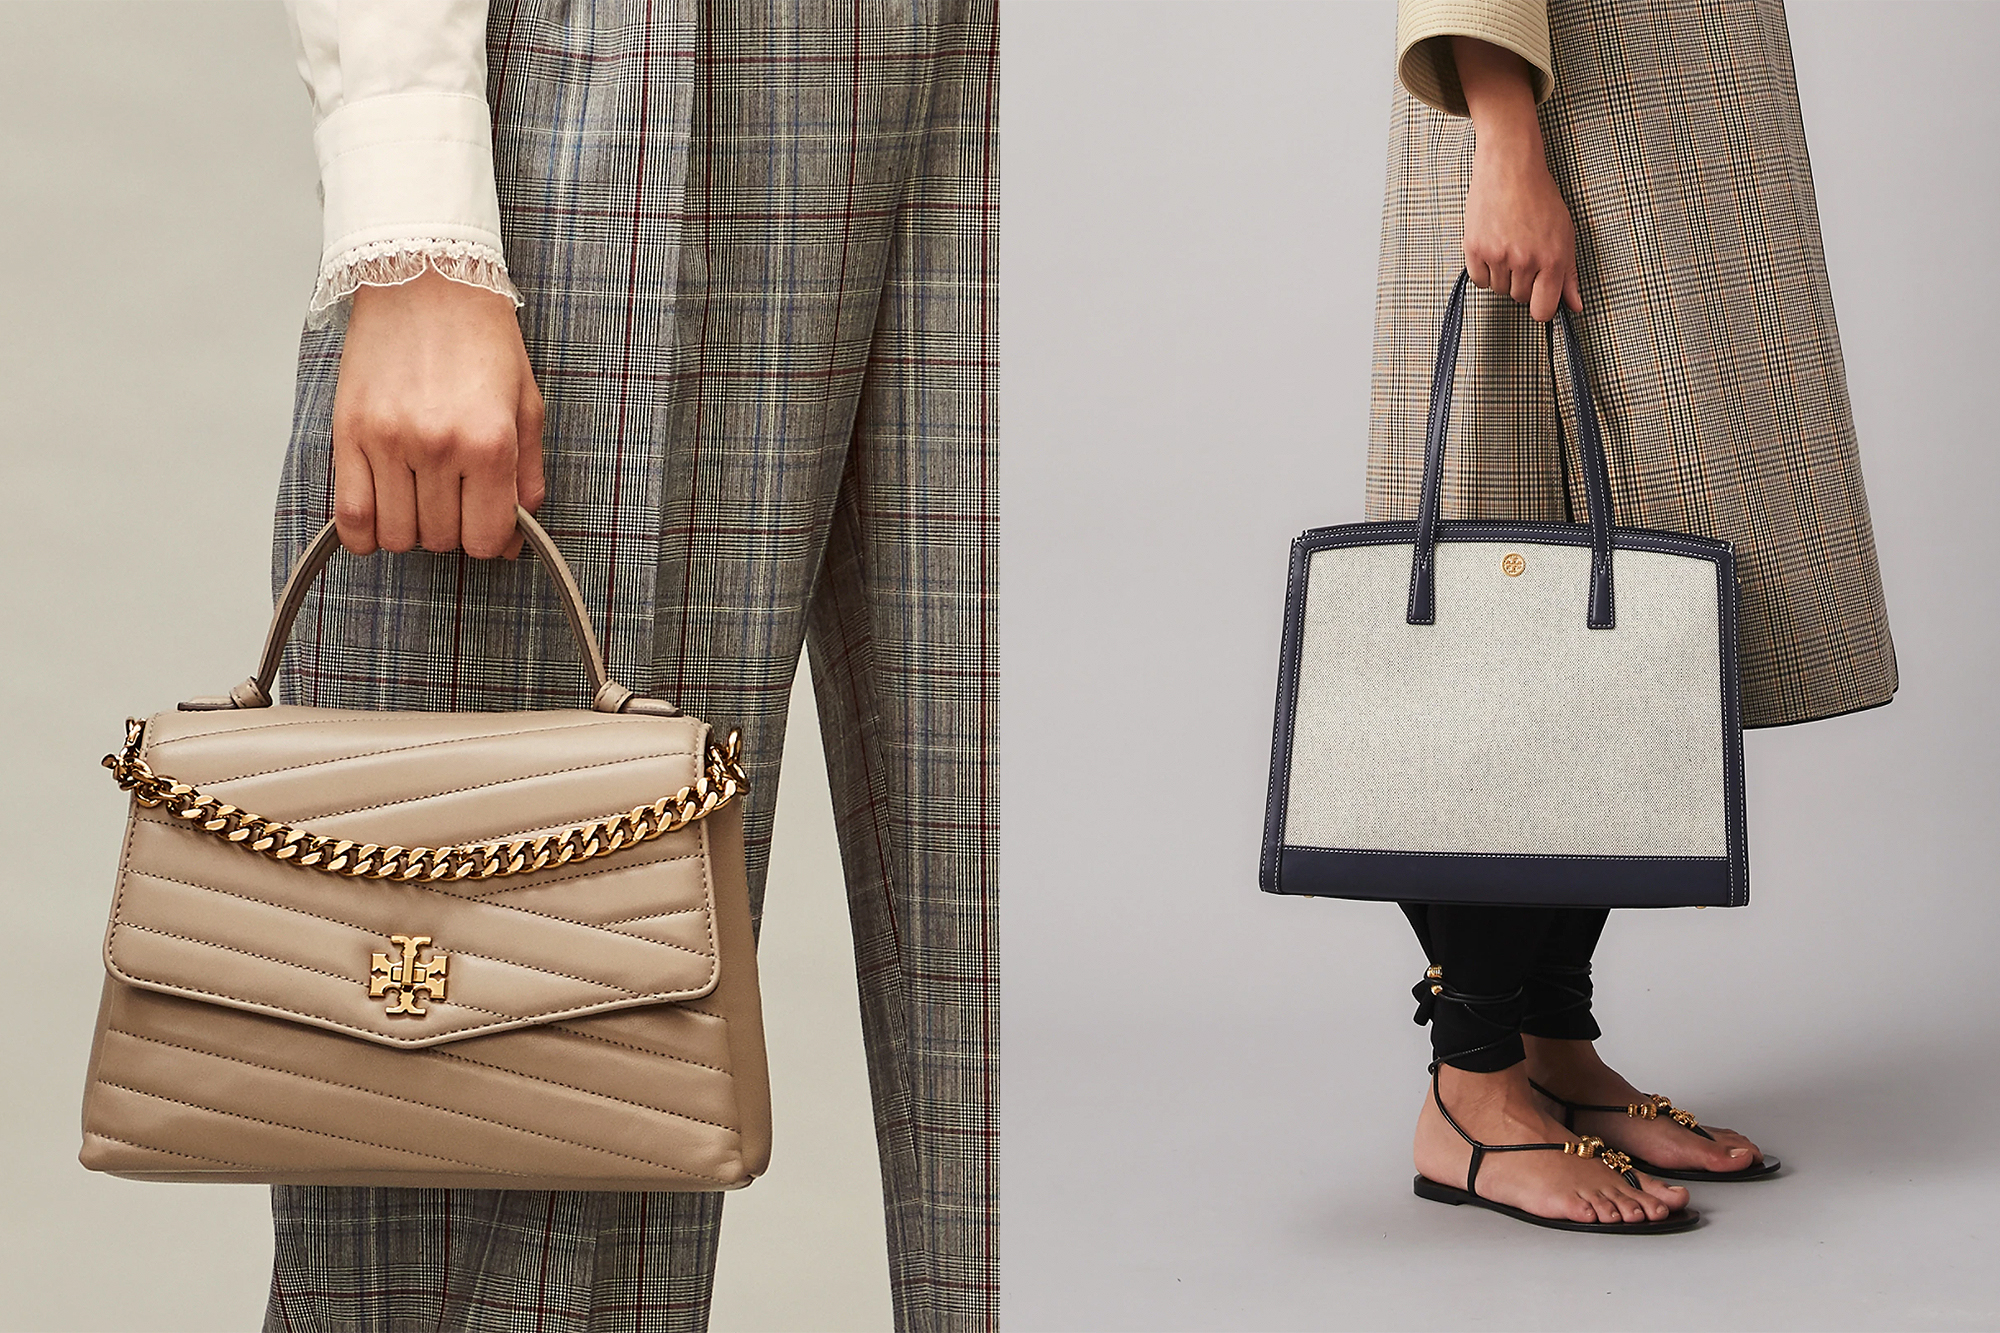 Tory Burch sale: Save big on purses, sandals and clothing